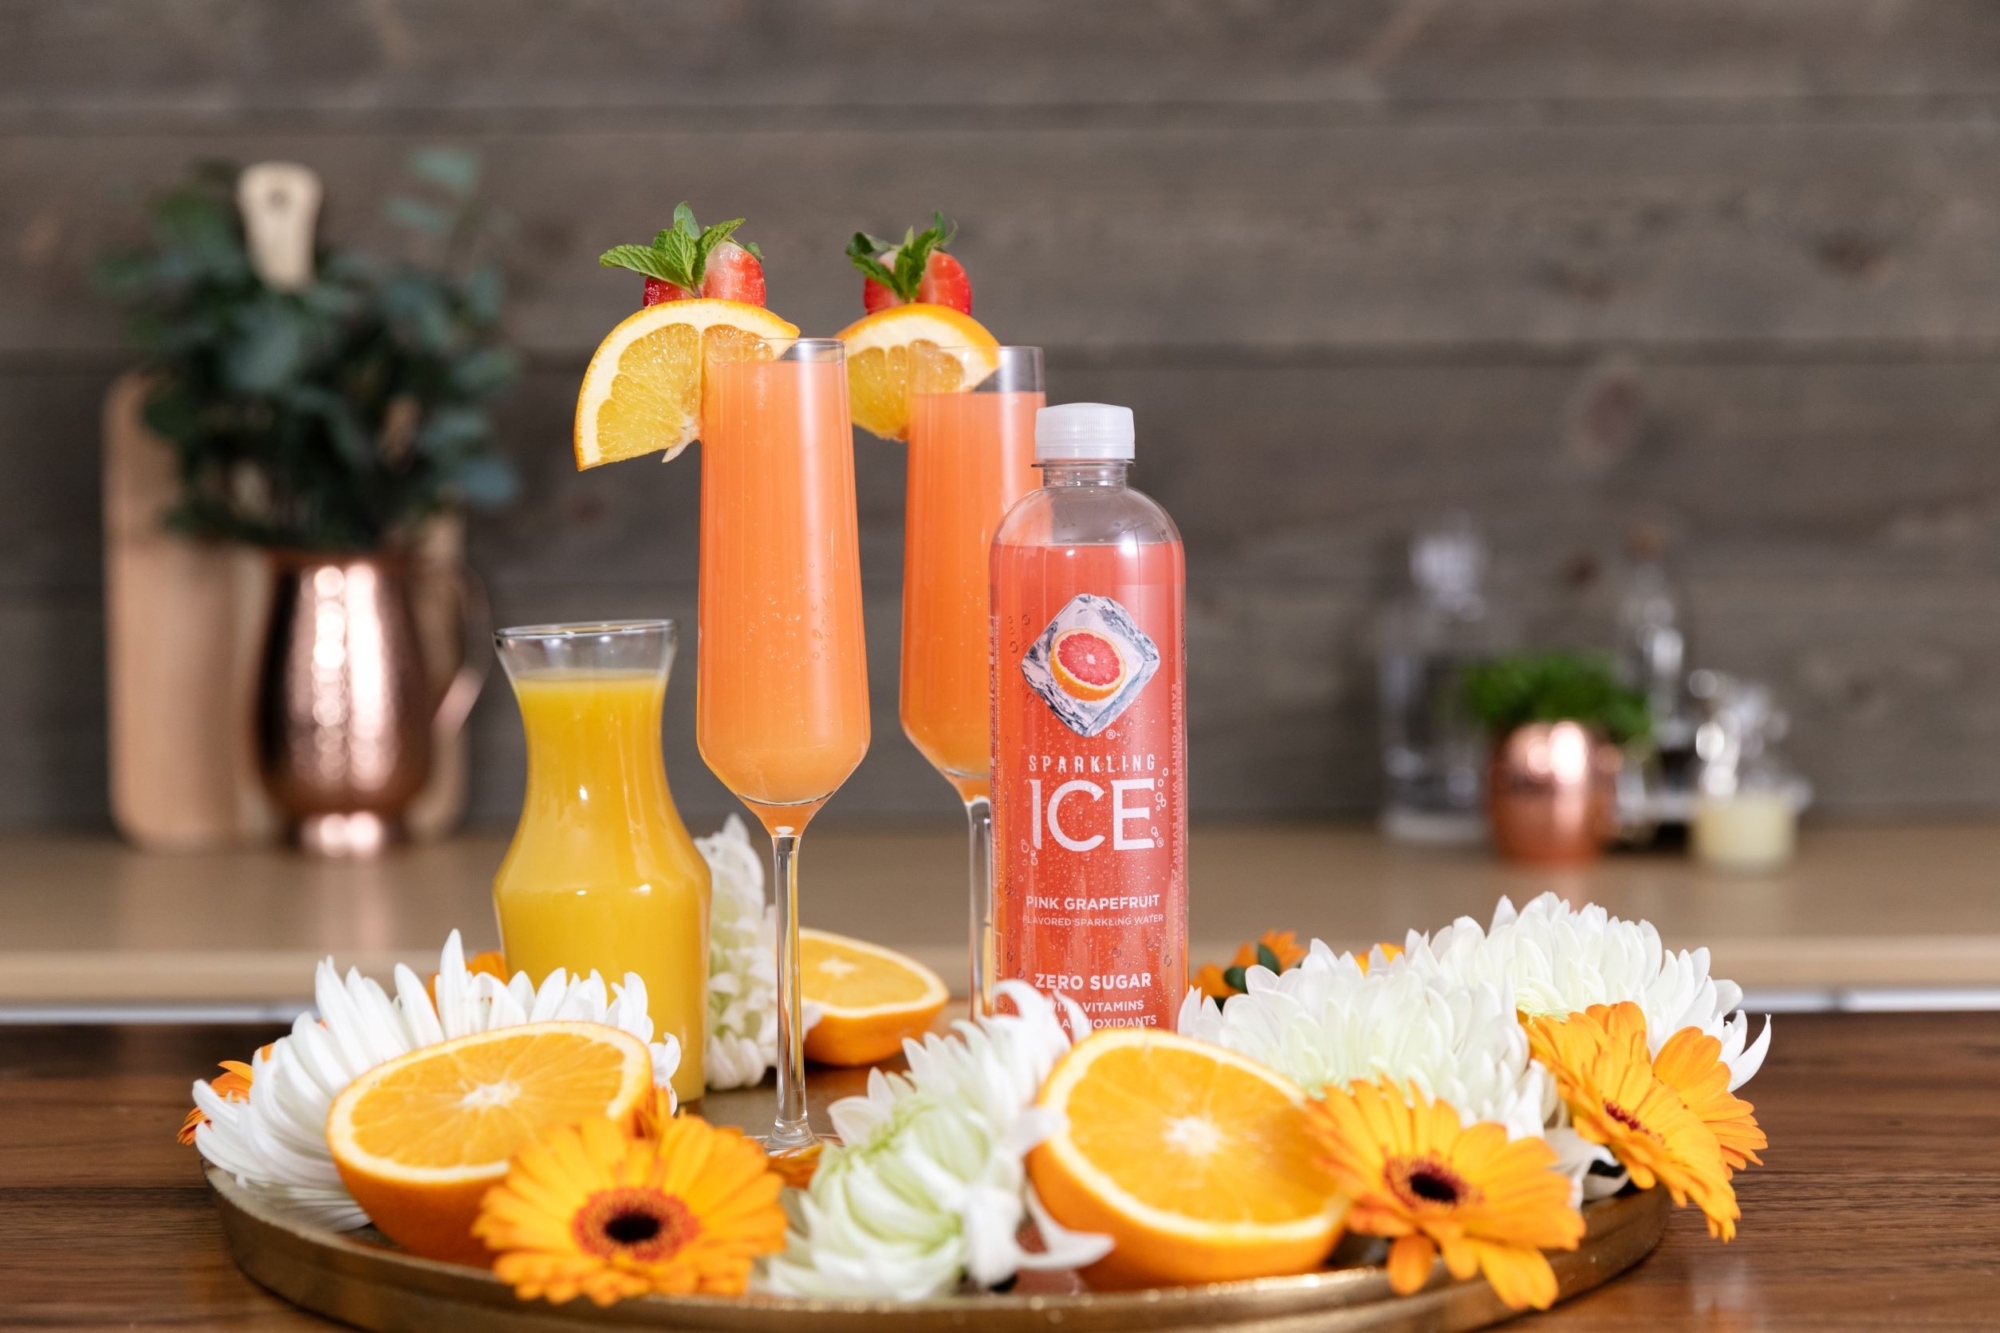 Sparkling Ice Pink Grapefruit mockmosa in a tall glass on table surrounded by fresh fruit and flowers.